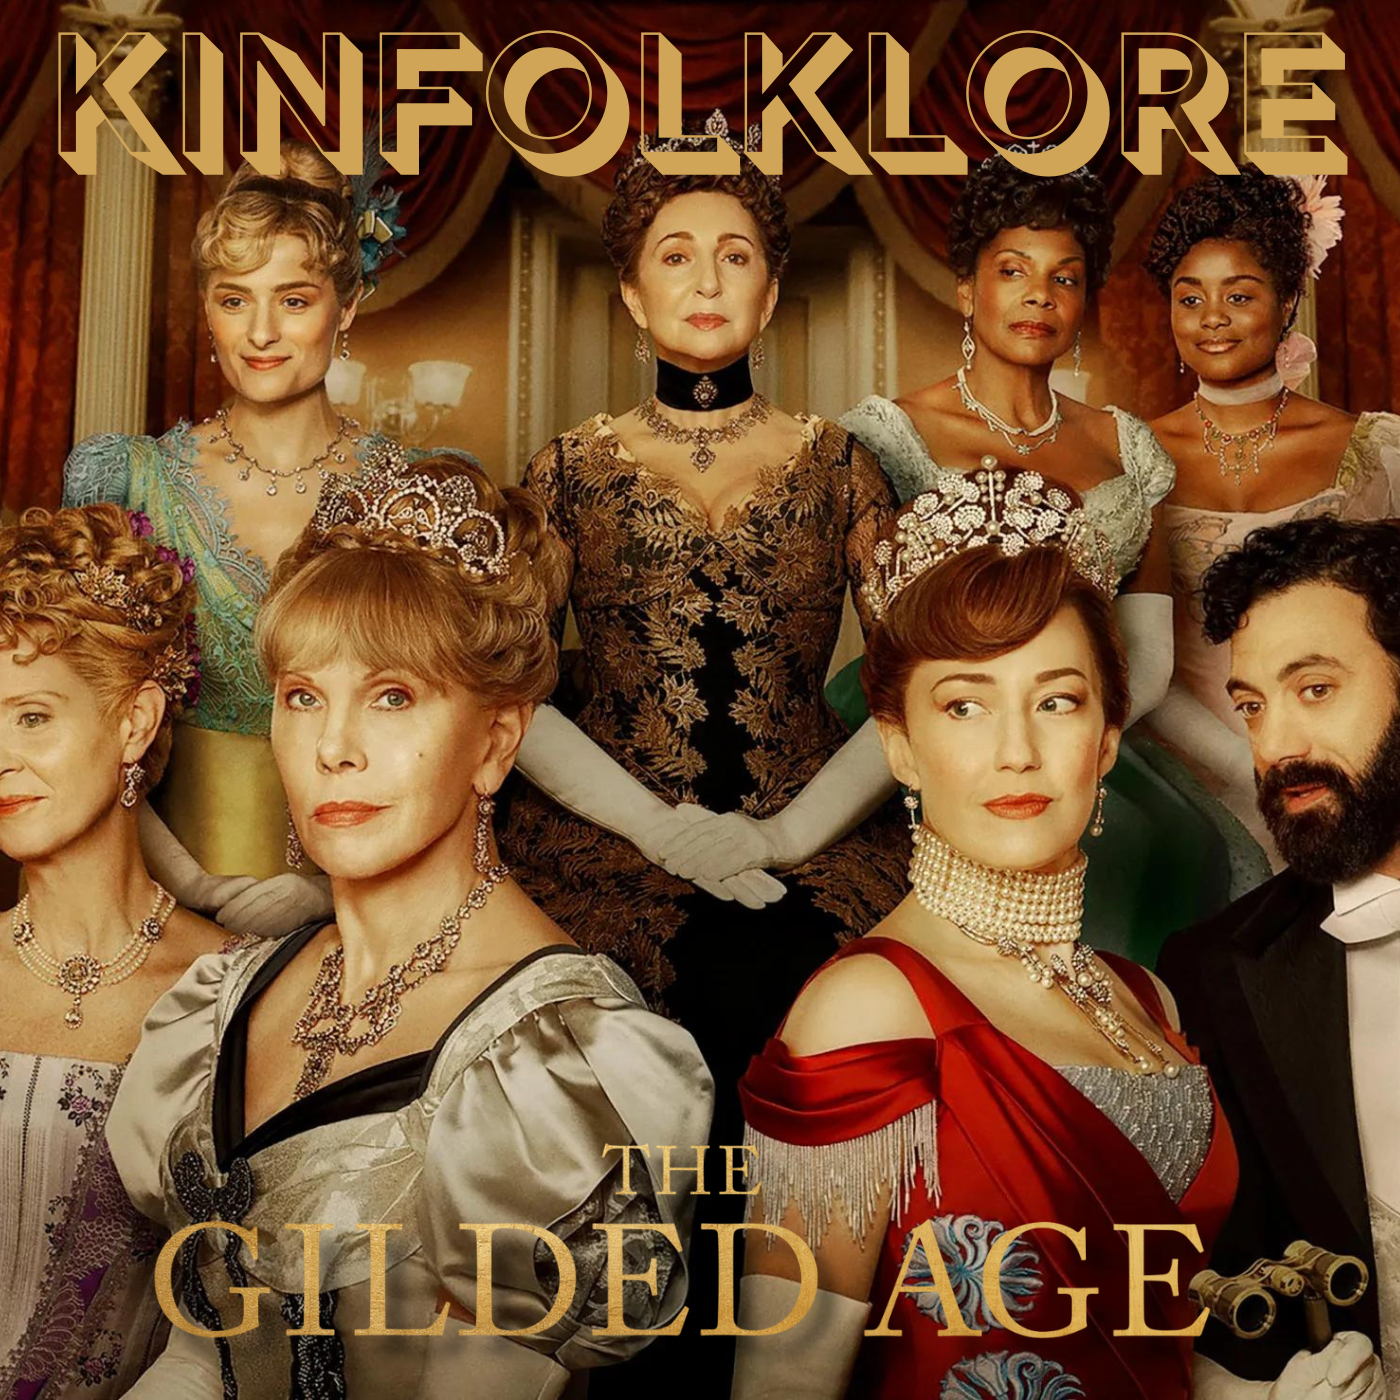 S12 Ep1: Kinfolklore: The Gilded Age (Episode 1)